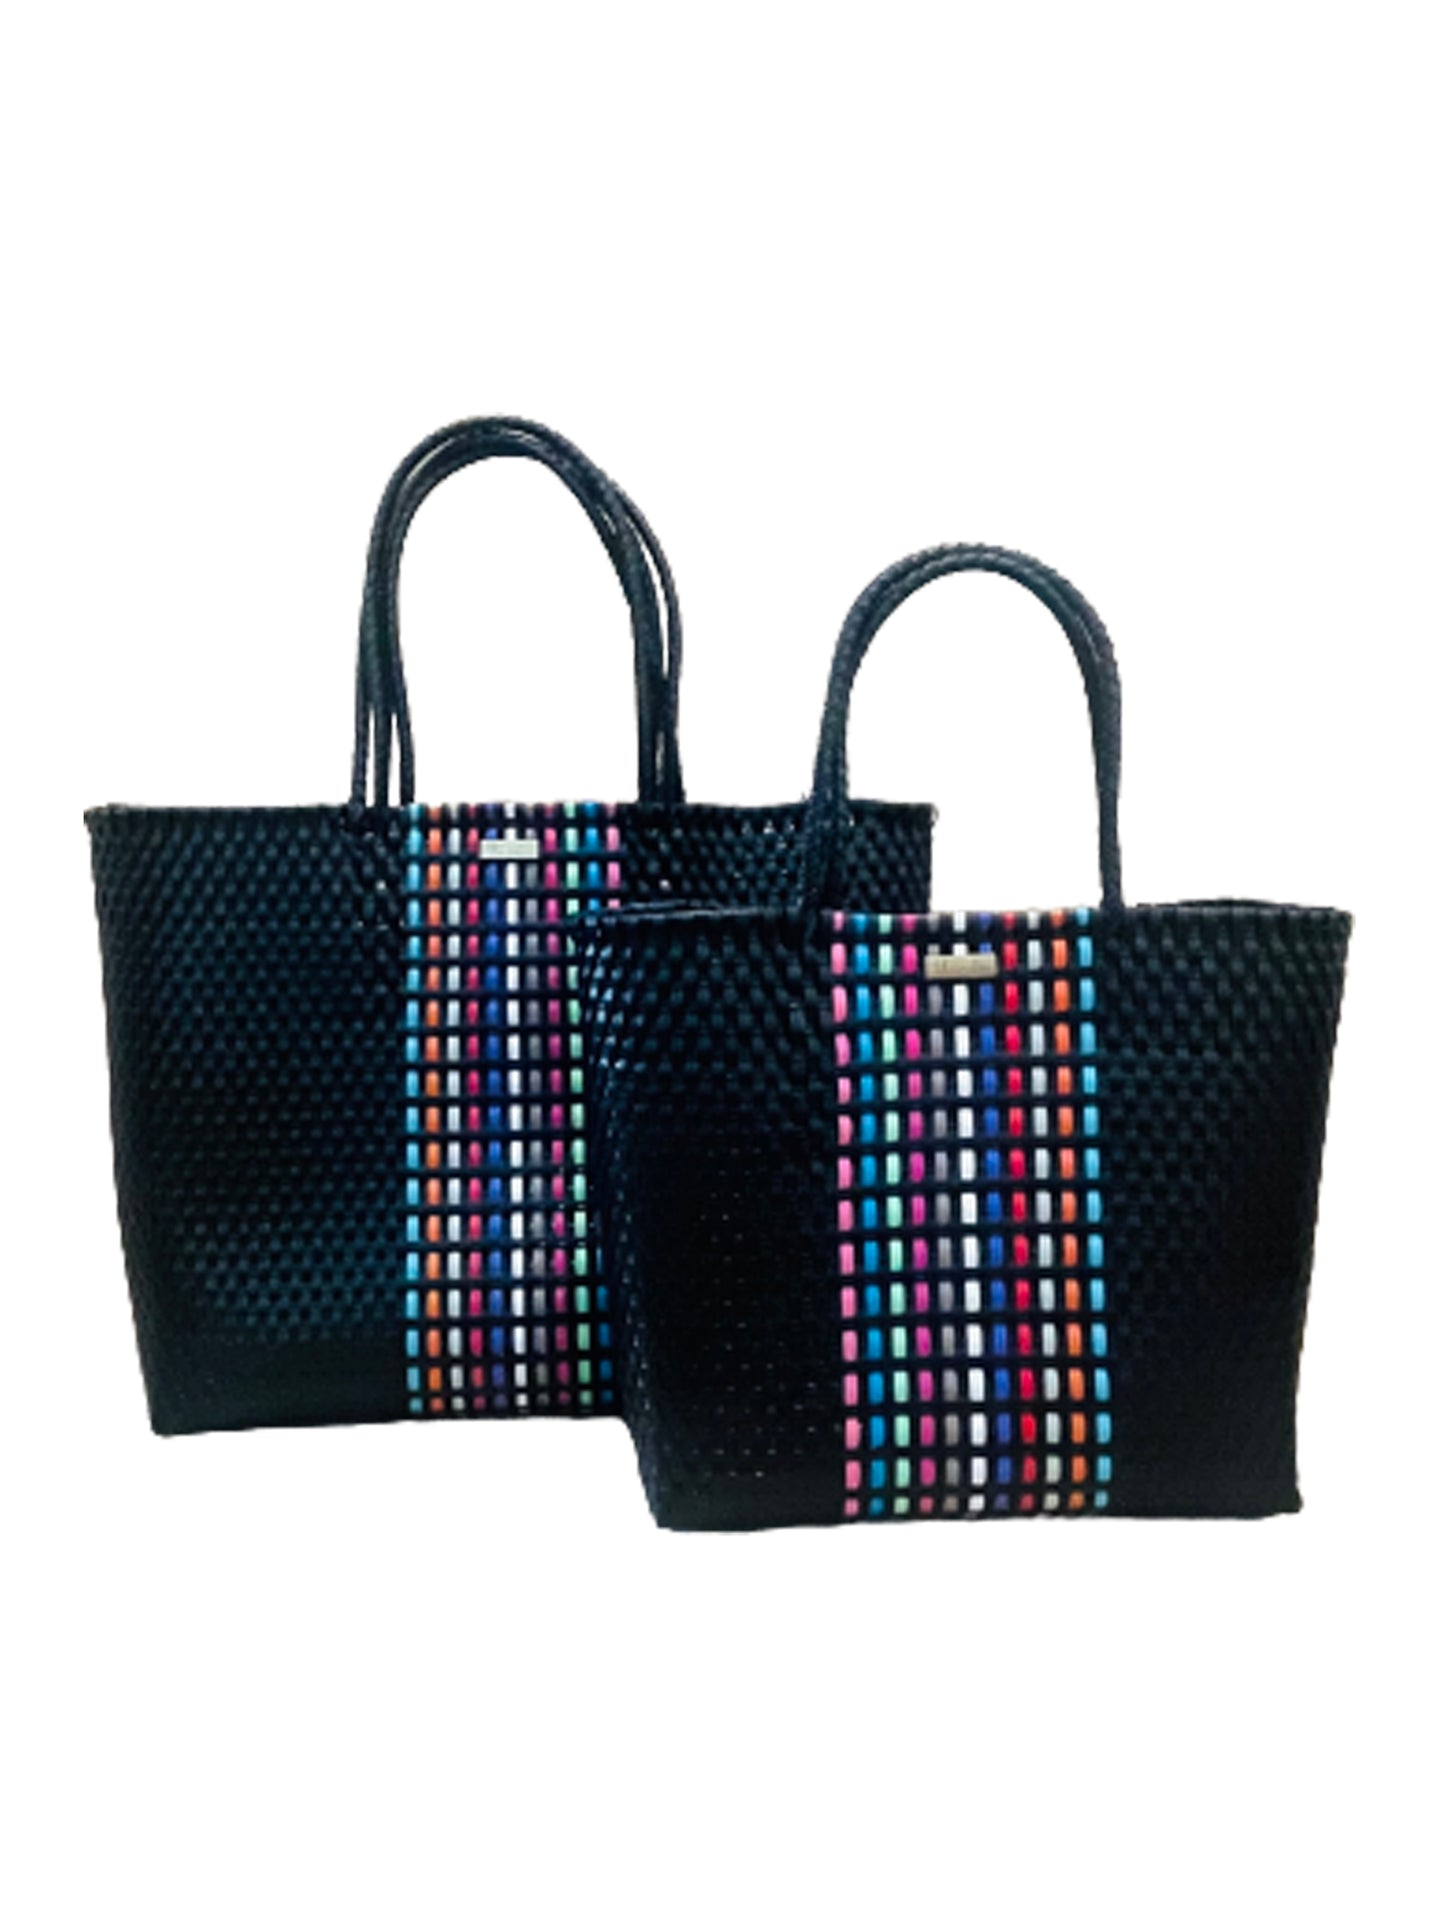 playa tote large and small colorful black